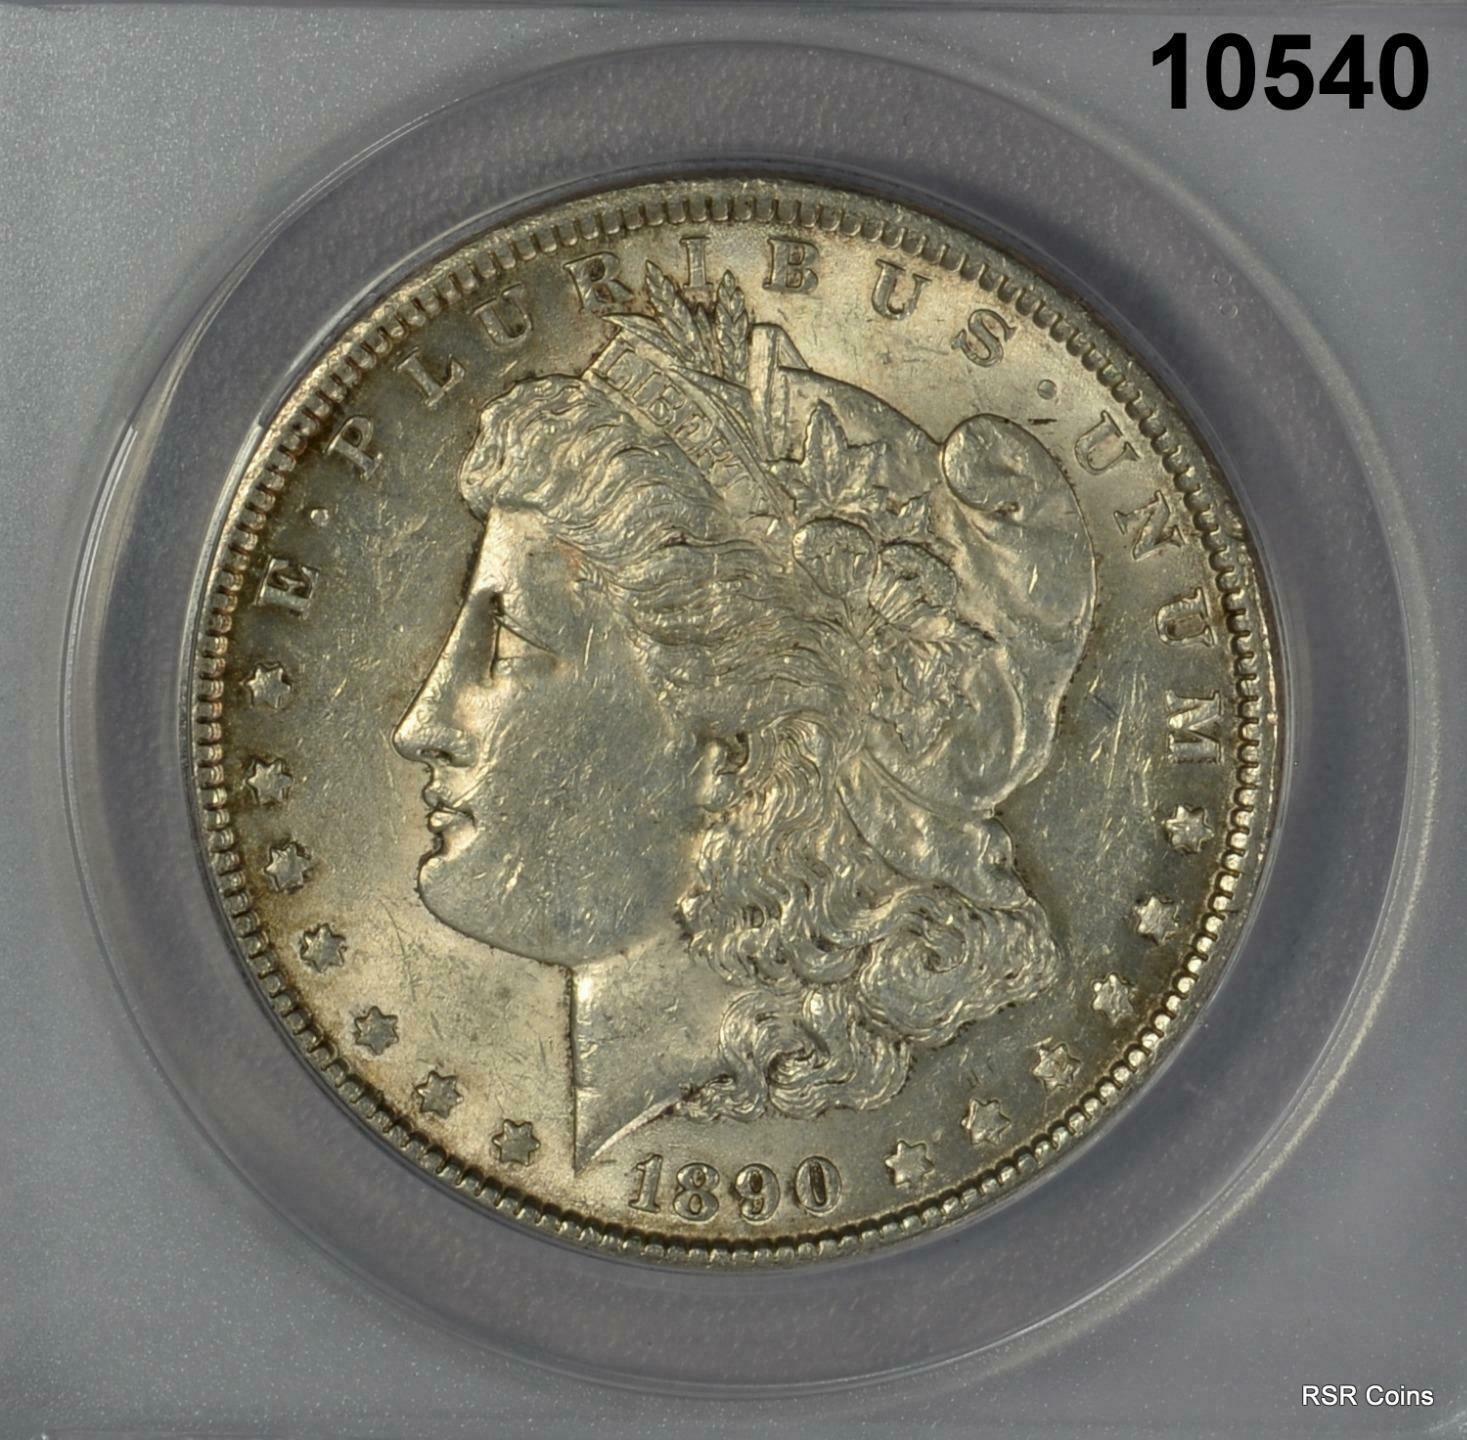 1890 MORGAN SILVER DOLLAR ANACS CERTIFIED AU58 CLEANED #10540